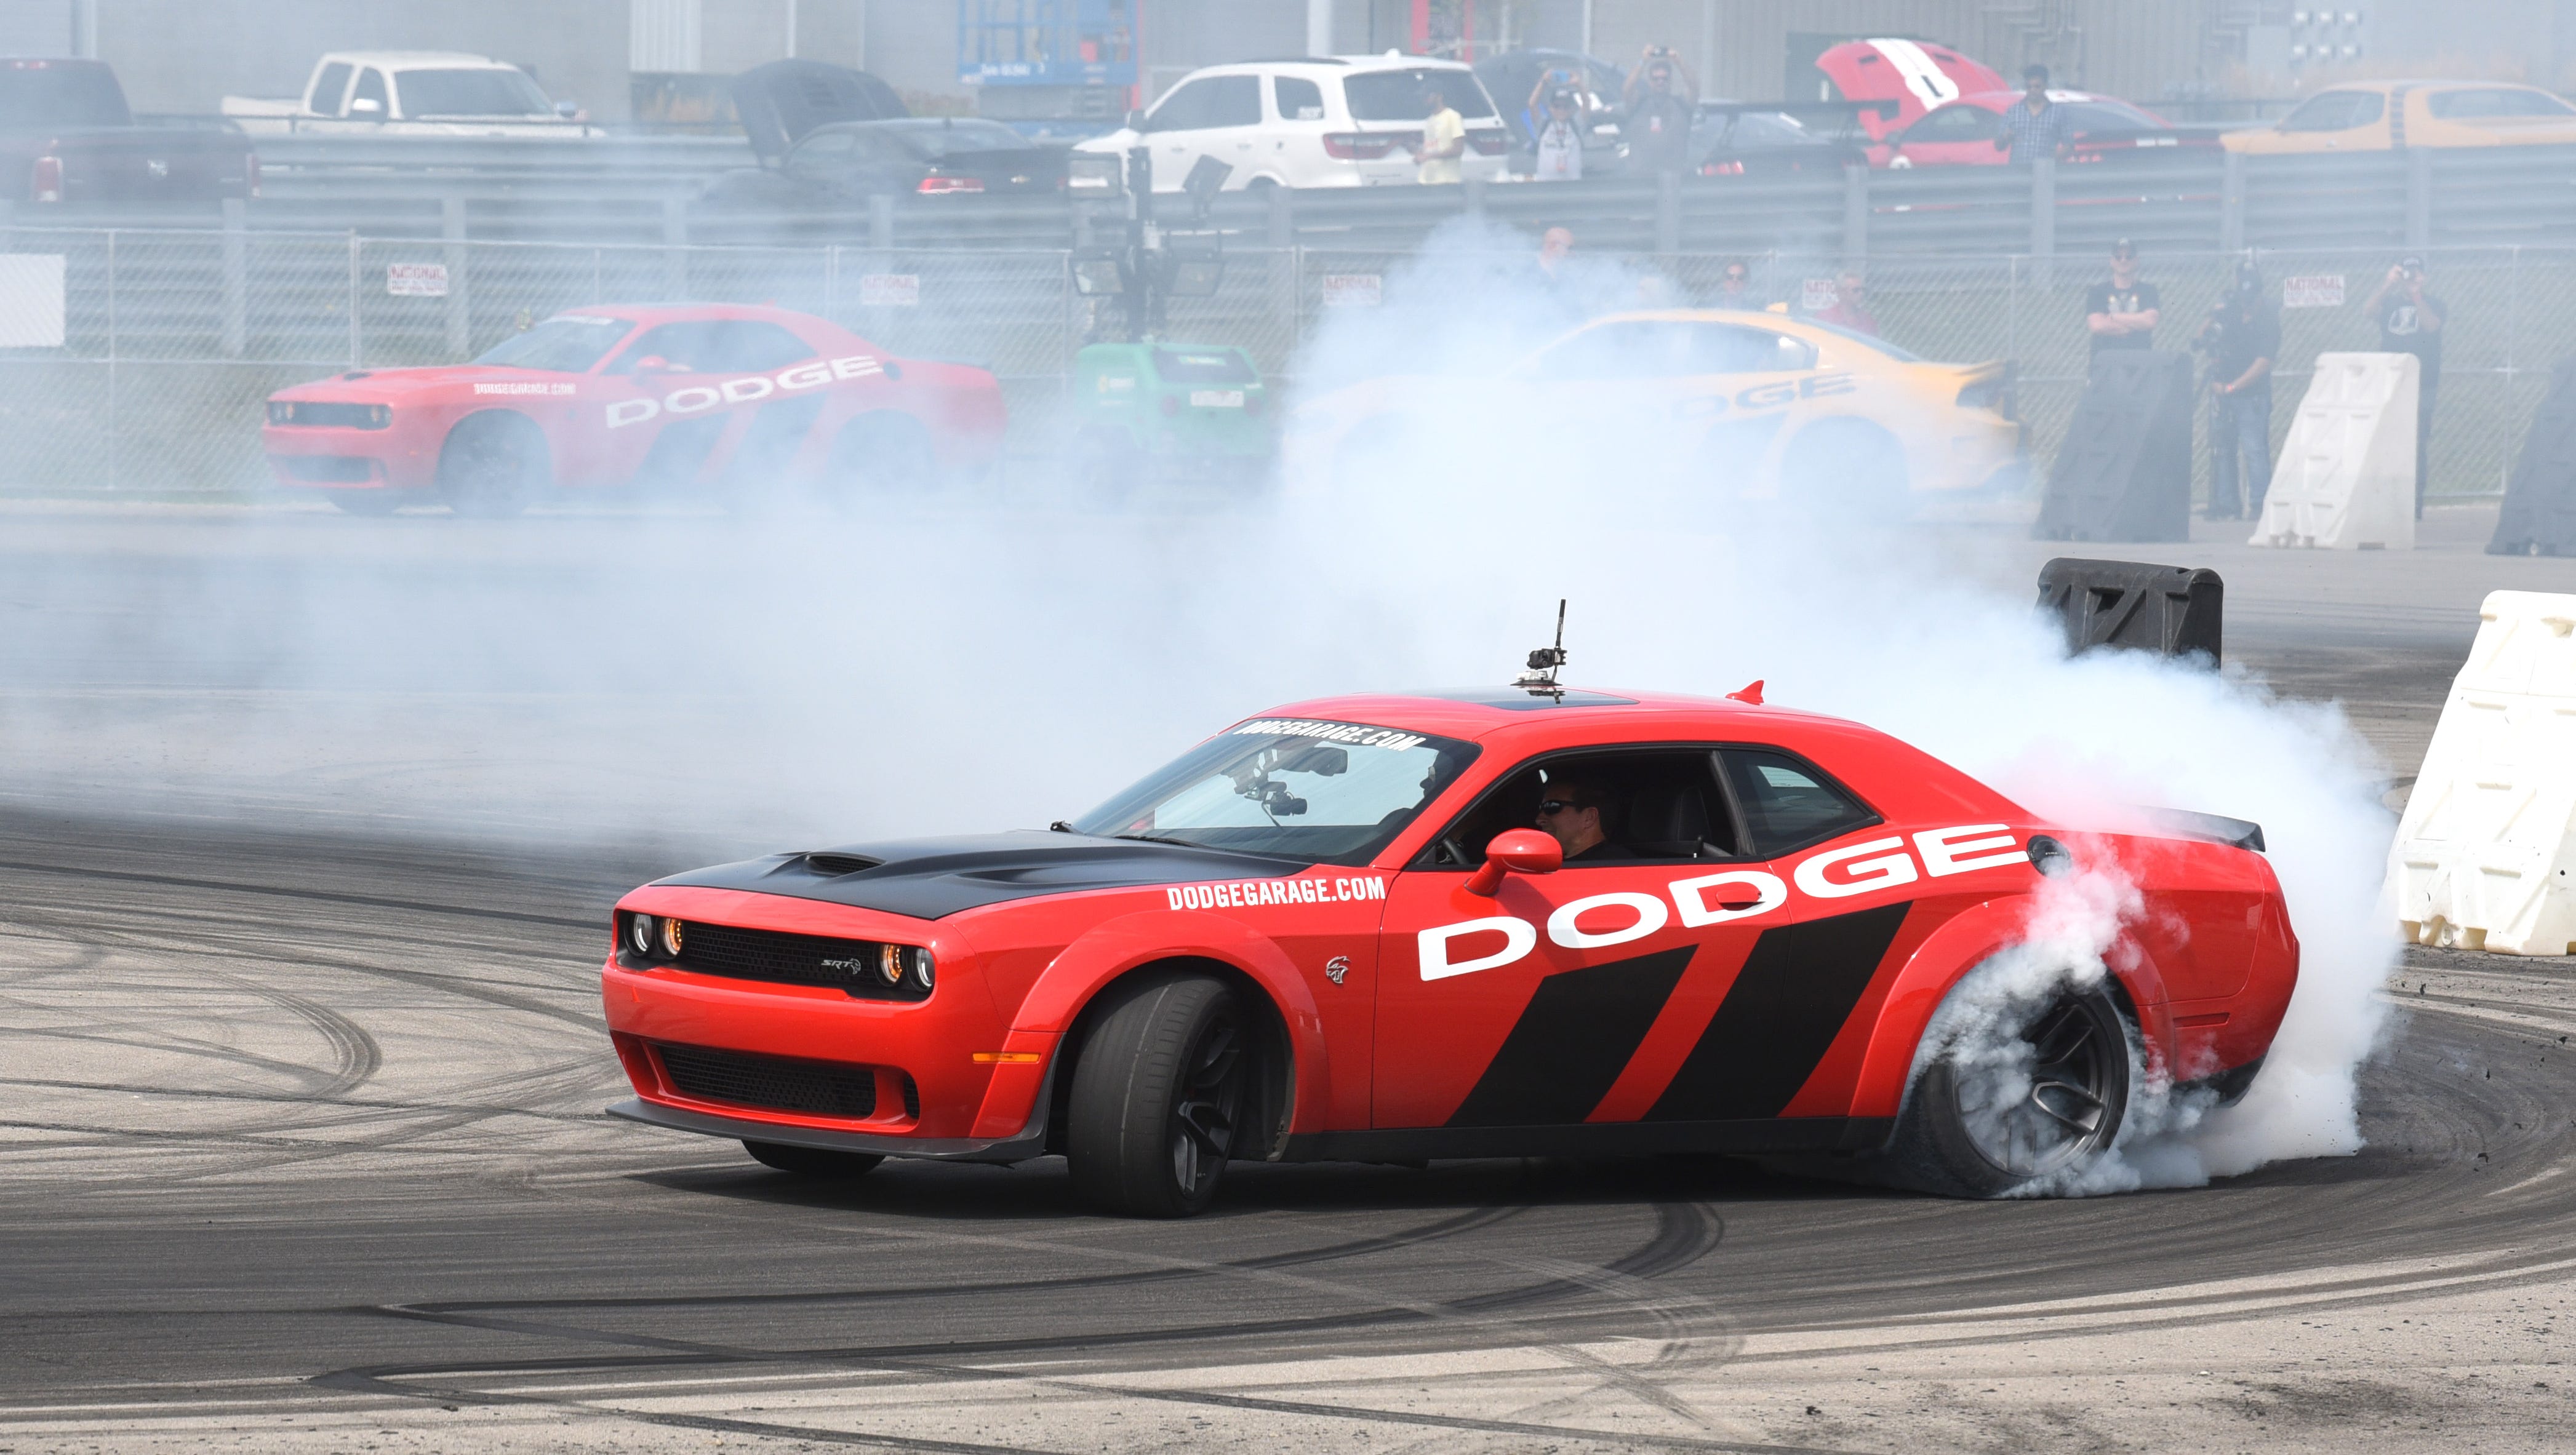 A Dodge Challenger hellcat performs a burnout at the Dodge drift rides demonstration during the Roadkill Nights event held at M1 Concourse in Pontiac on Saturday, August 11, 2018